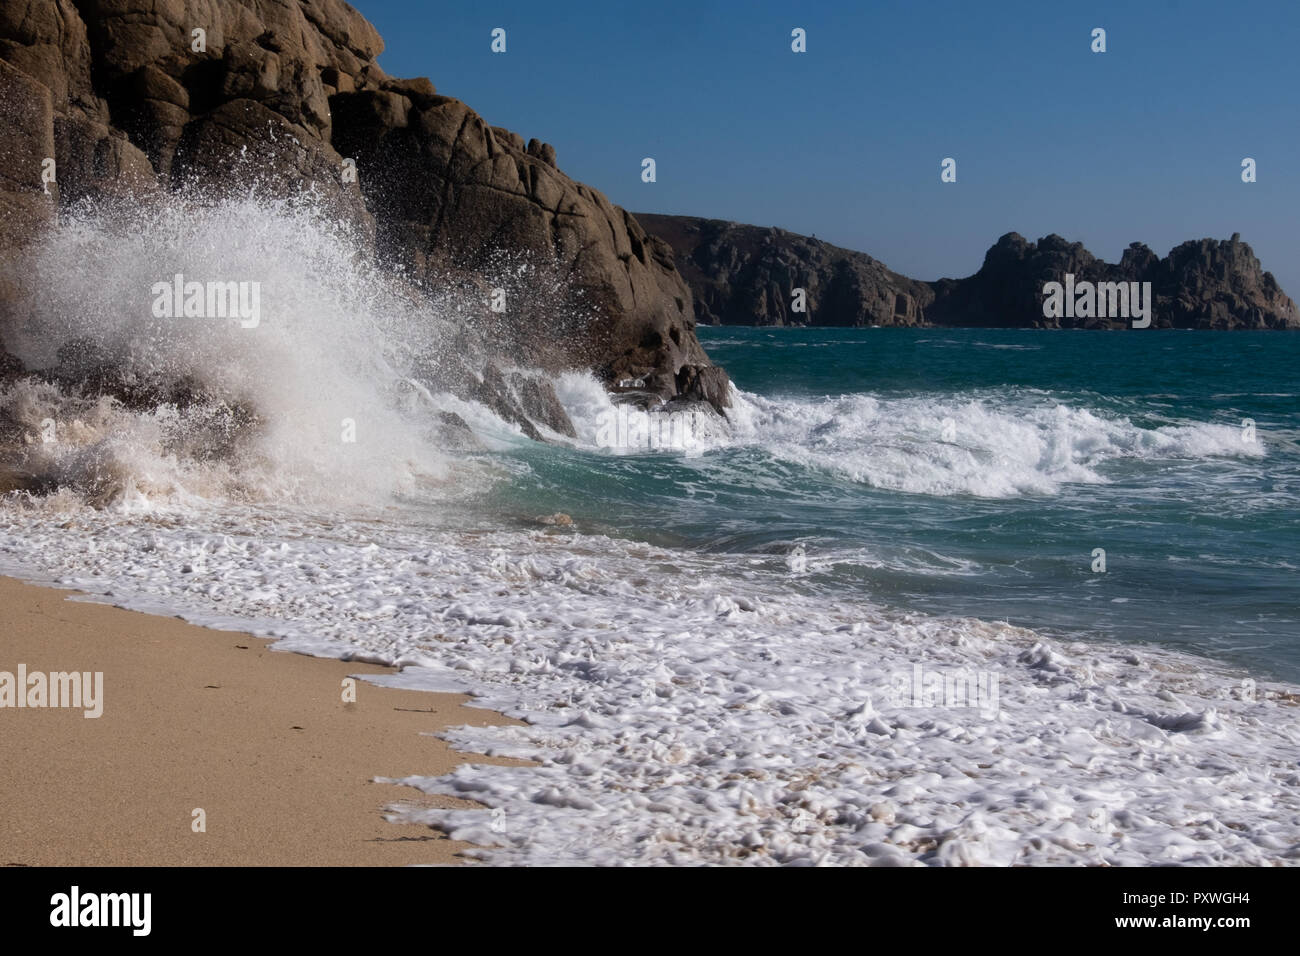 Sea swirling up the beach in waves crashing against the cliff rocks to shower water into the air in a white fountain of power. Stock Photo